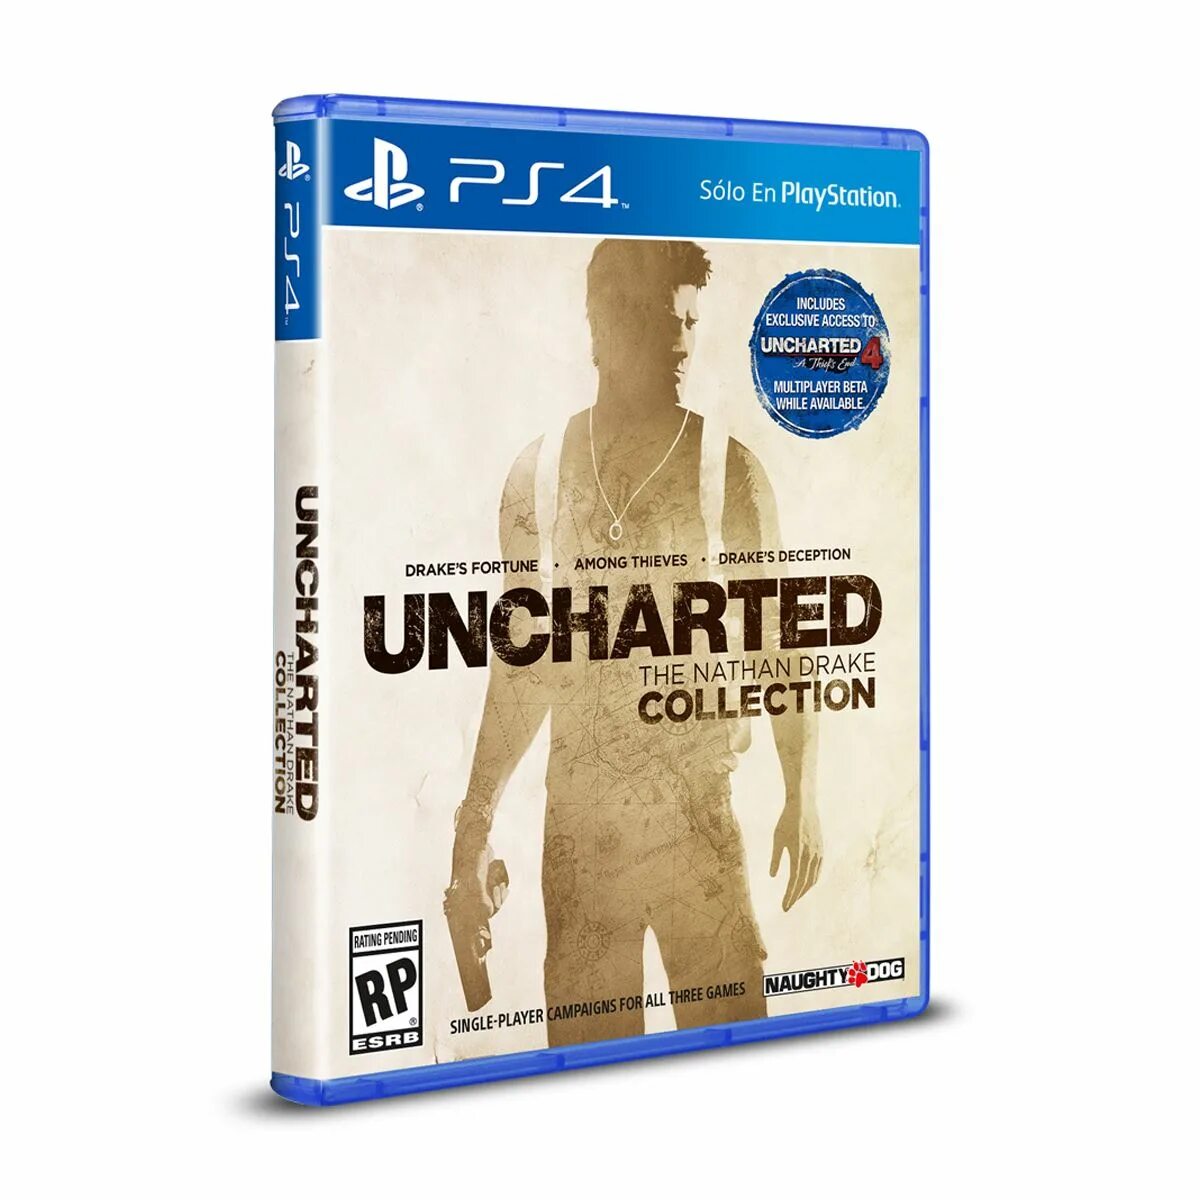 Uncharted collection ps4. Uncharted Nathan Drake collection ps4. Uncharted Trilogy ps4. Uncharted трилогия.